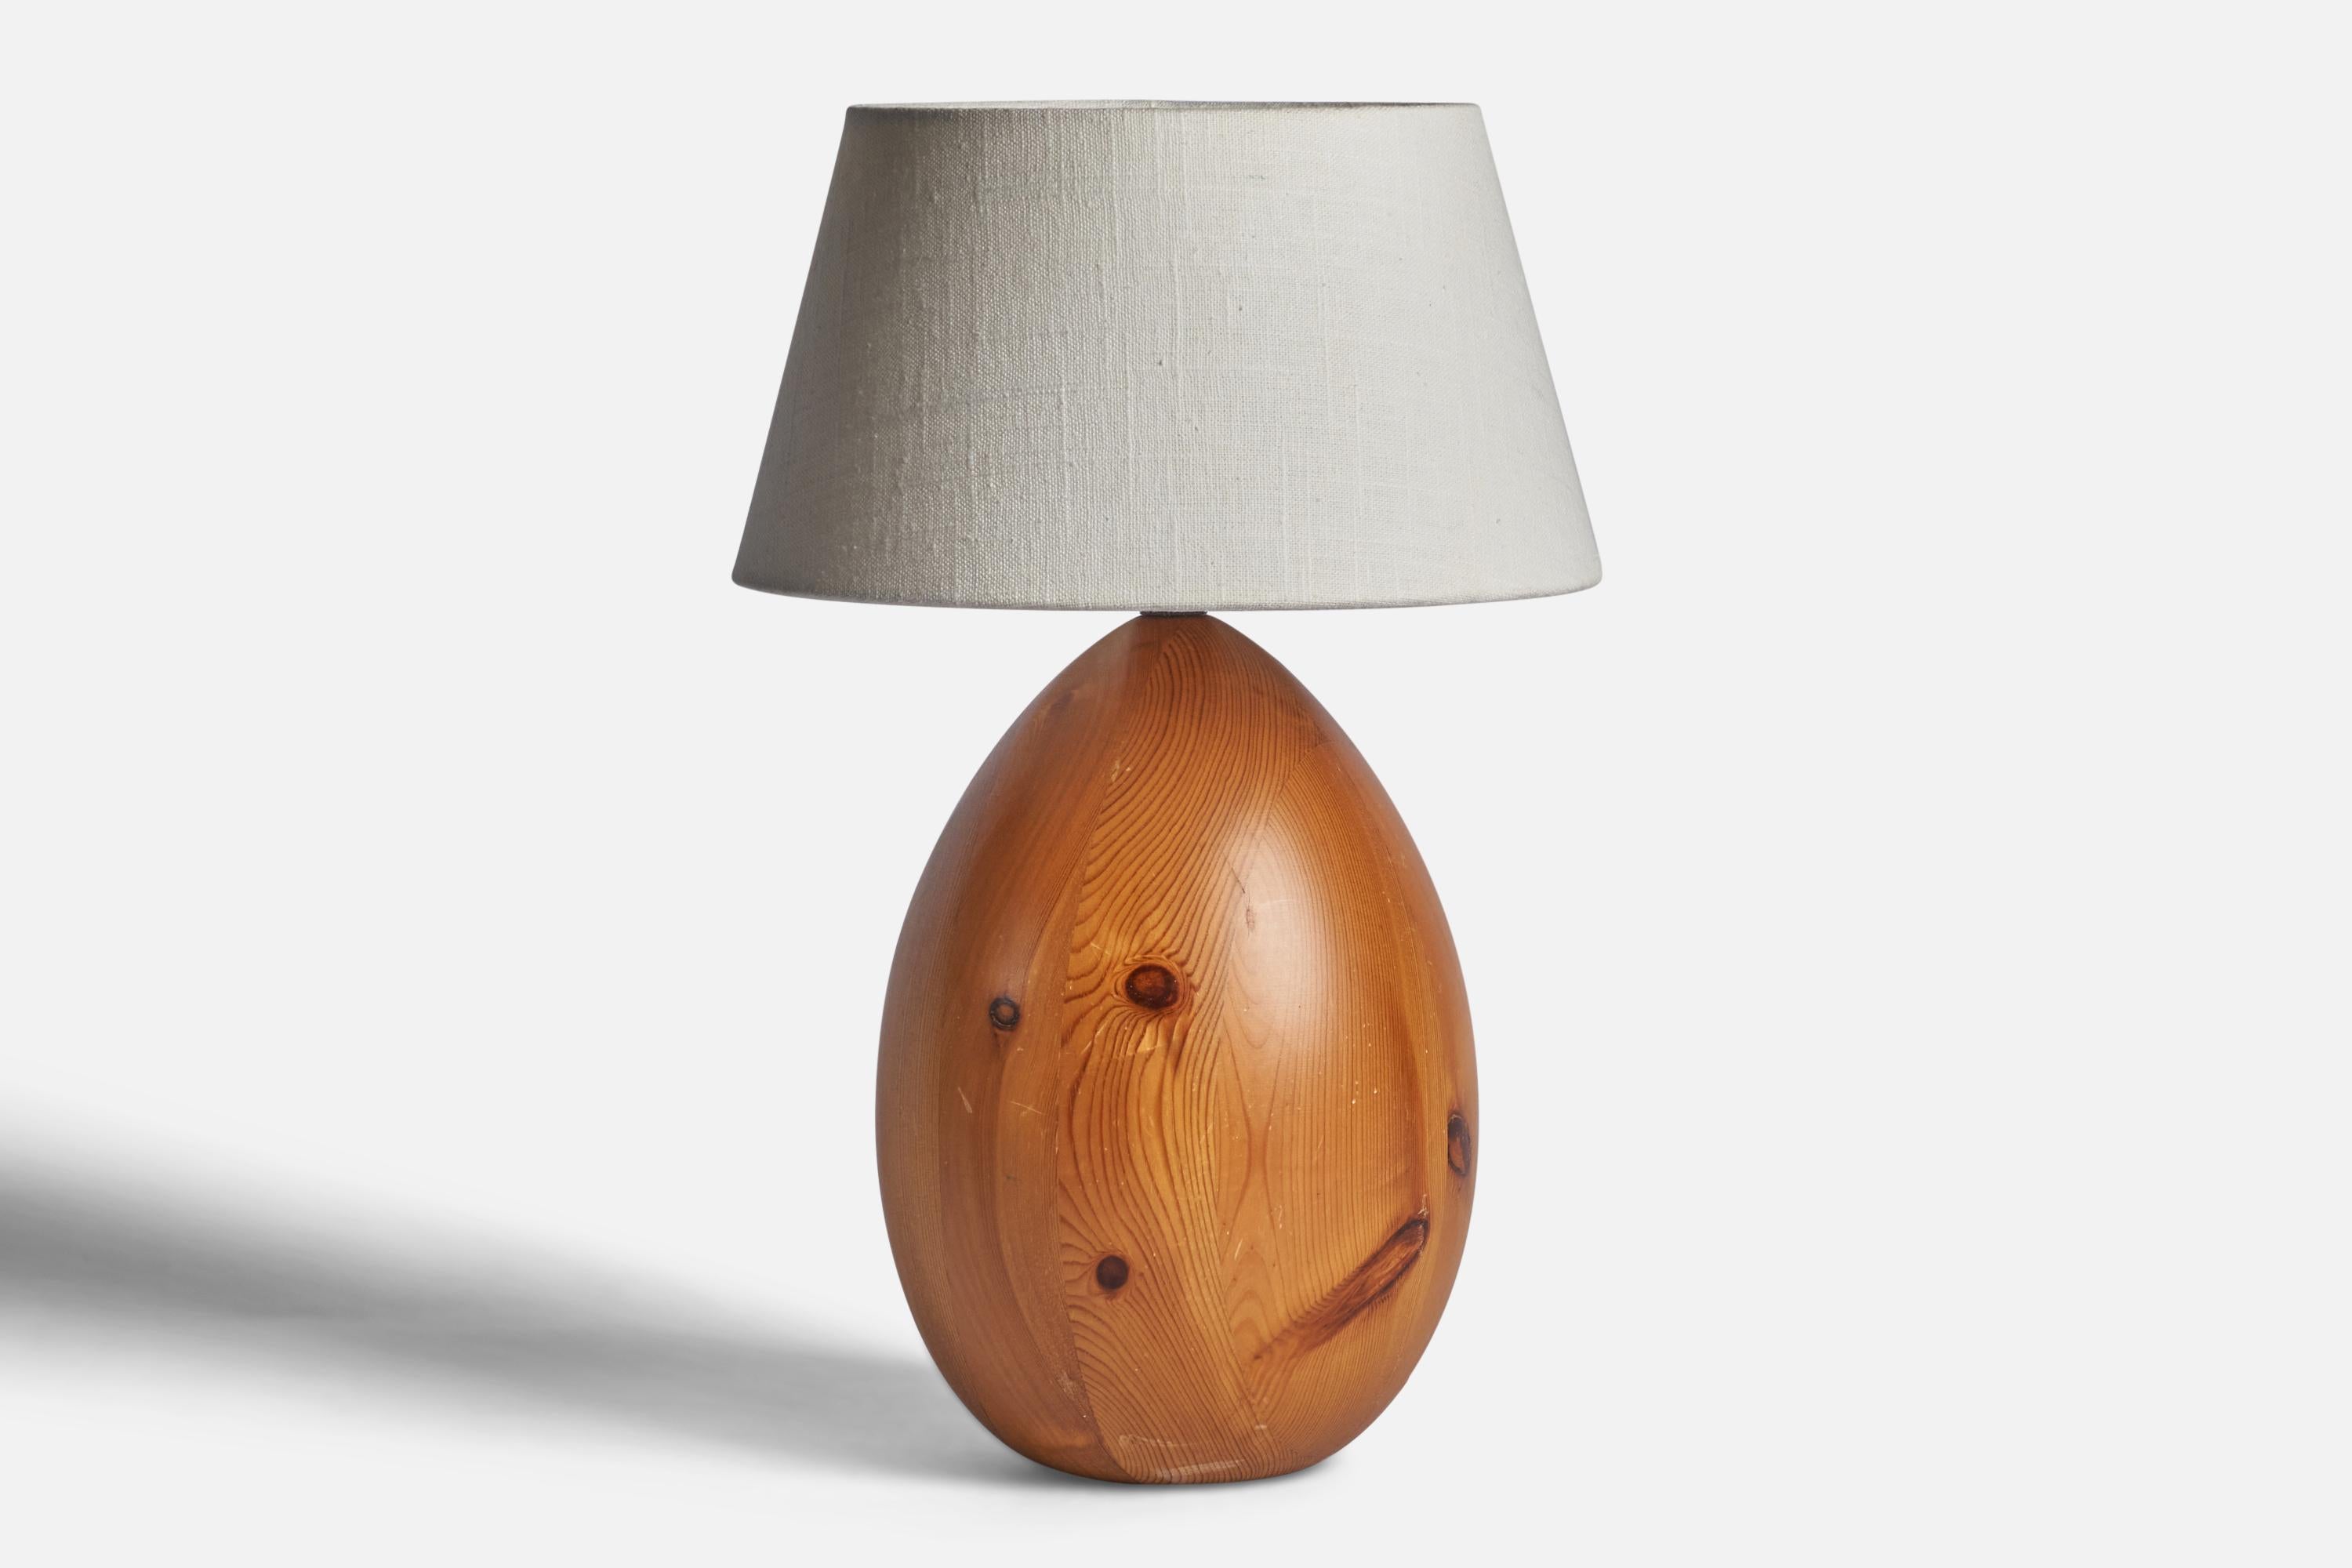 A pine table lamp designed by Uno Kristiansson and produced by Luxus Vittsjö, Sweden, 1970s.

Dimensions of Lamp (inches): 12